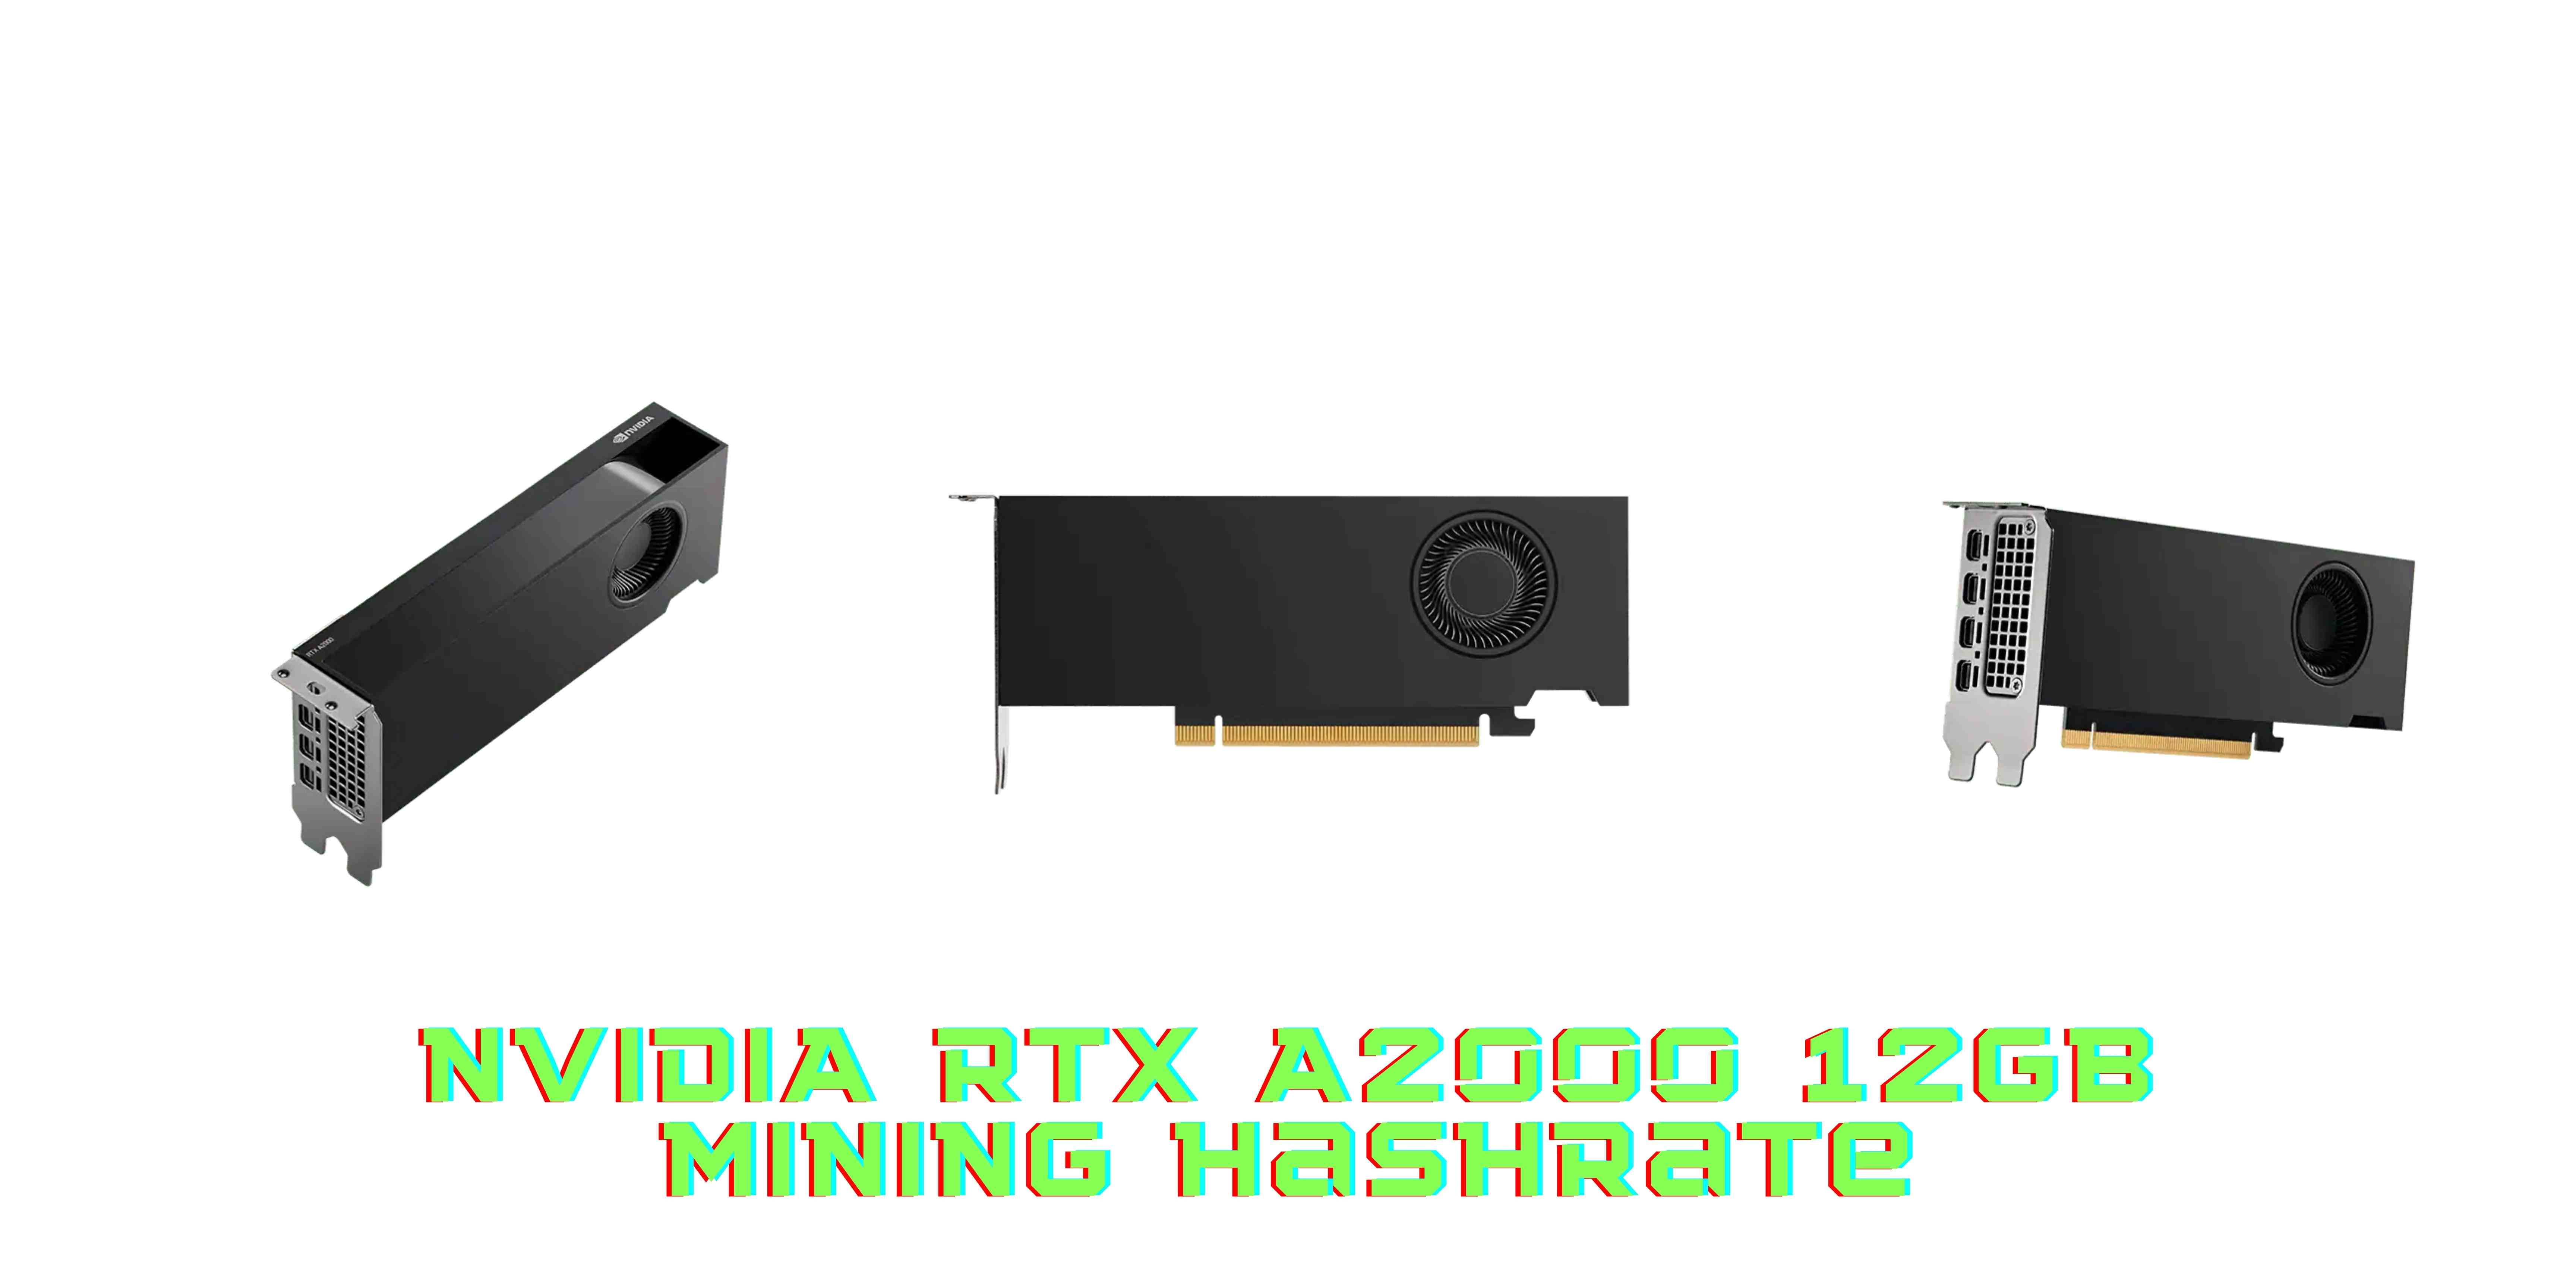 Nvidia Rtx A2000 12gb Mining Hashrate Offers Better Ether Mining Efficiency